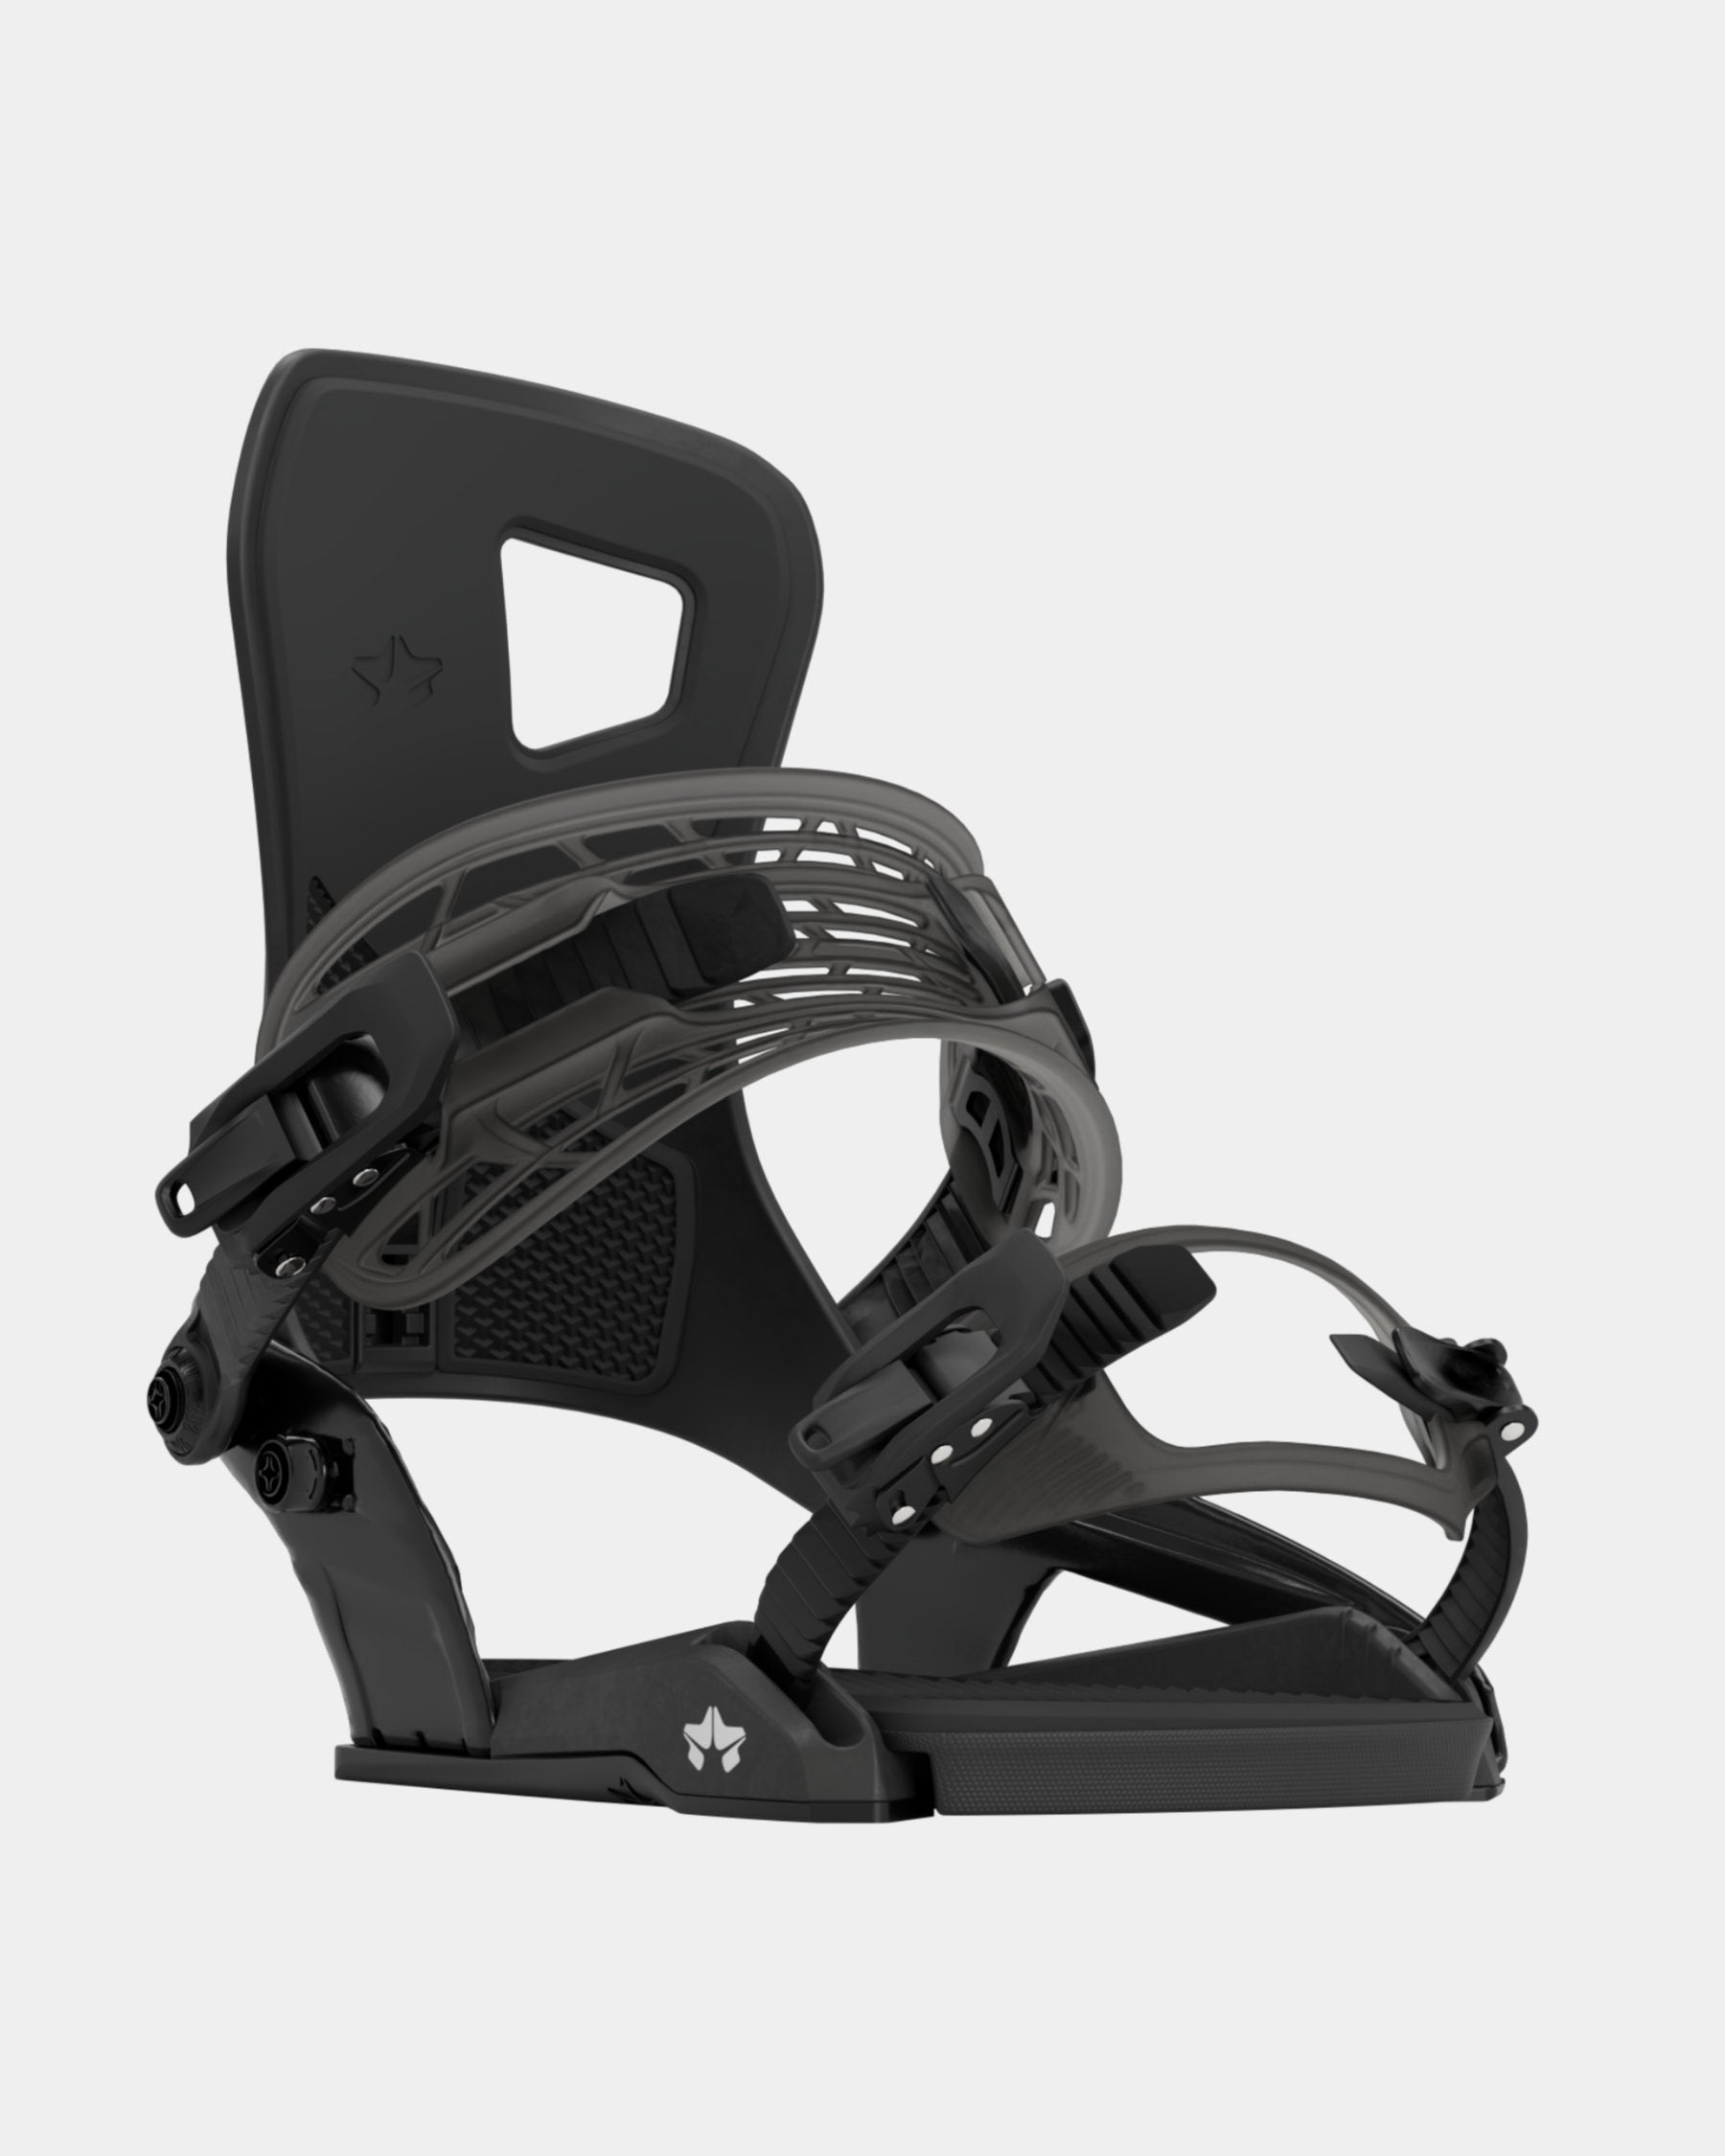 Rome Flare 2022 womens snowboard bindings product photo from the back front cover shot in the studio color-black